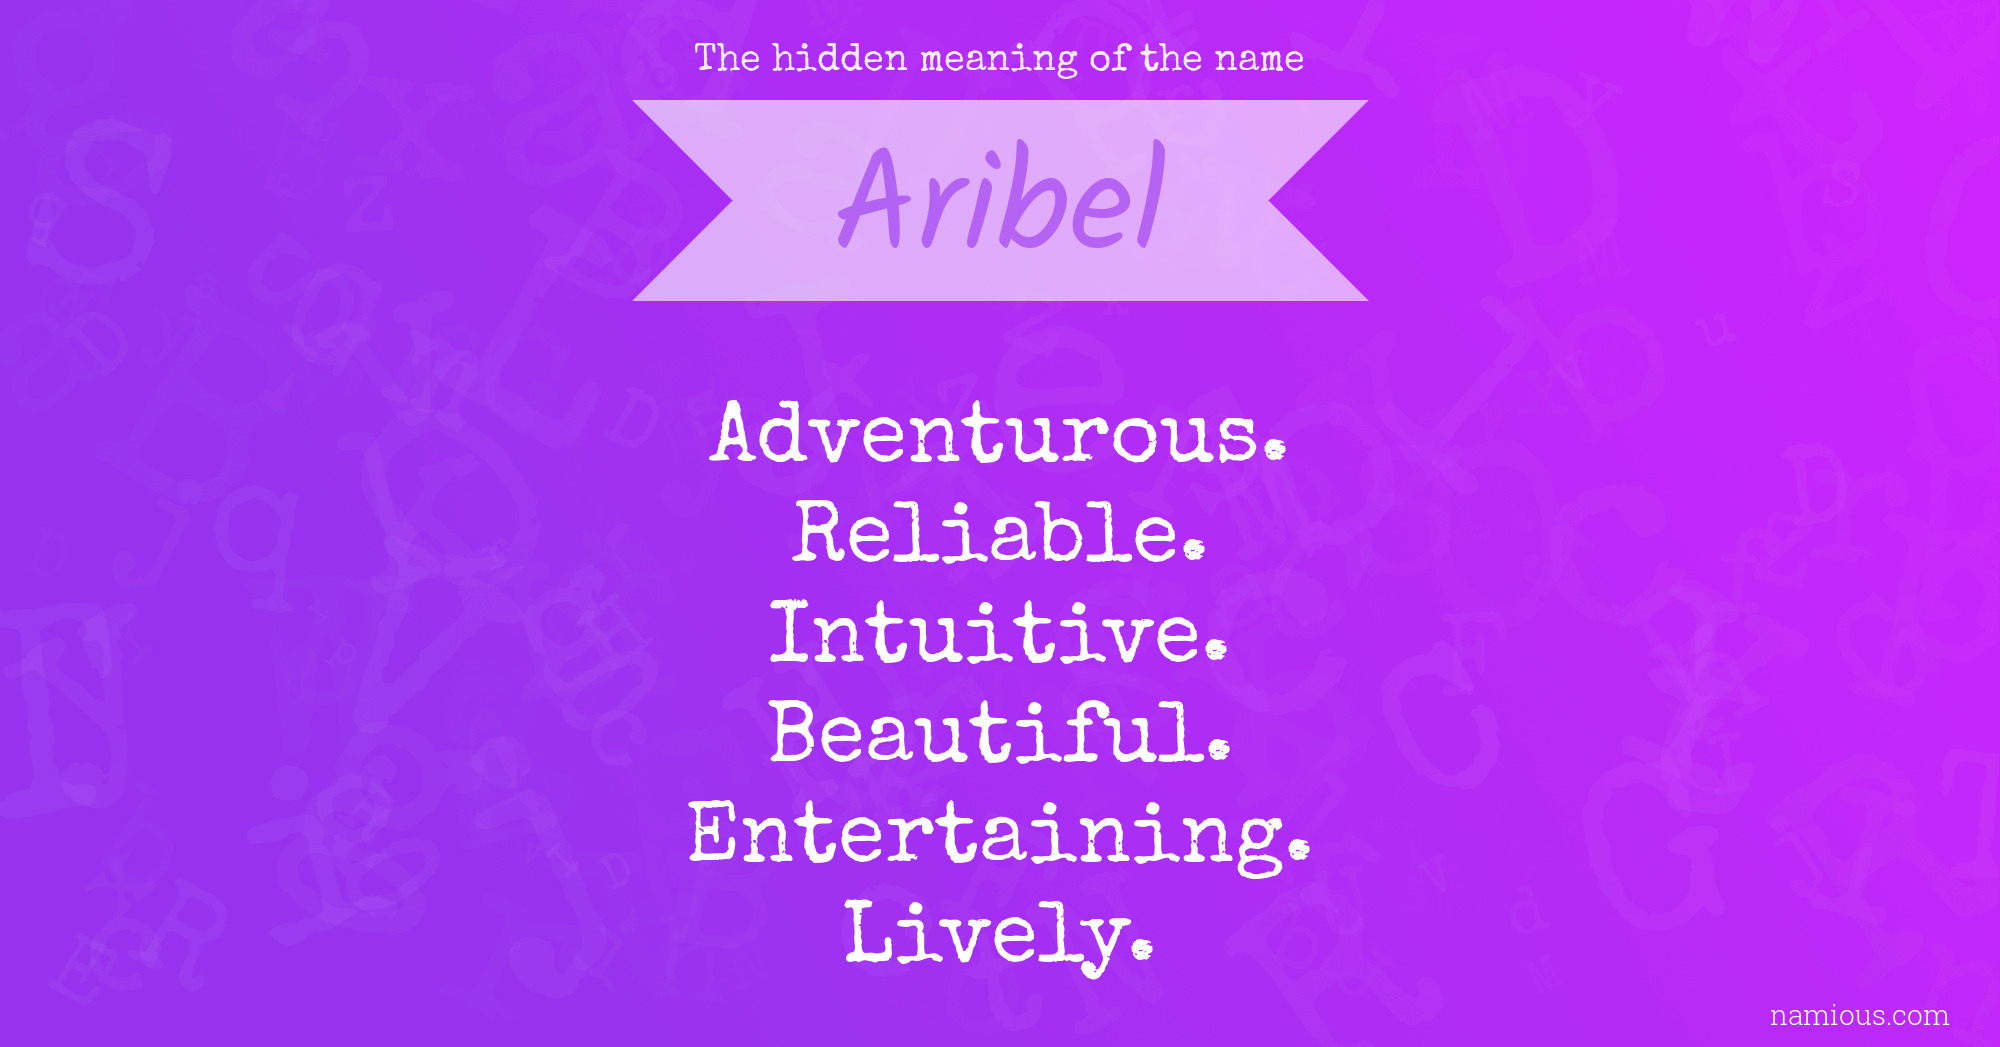 The hidden meaning of the name Aribel